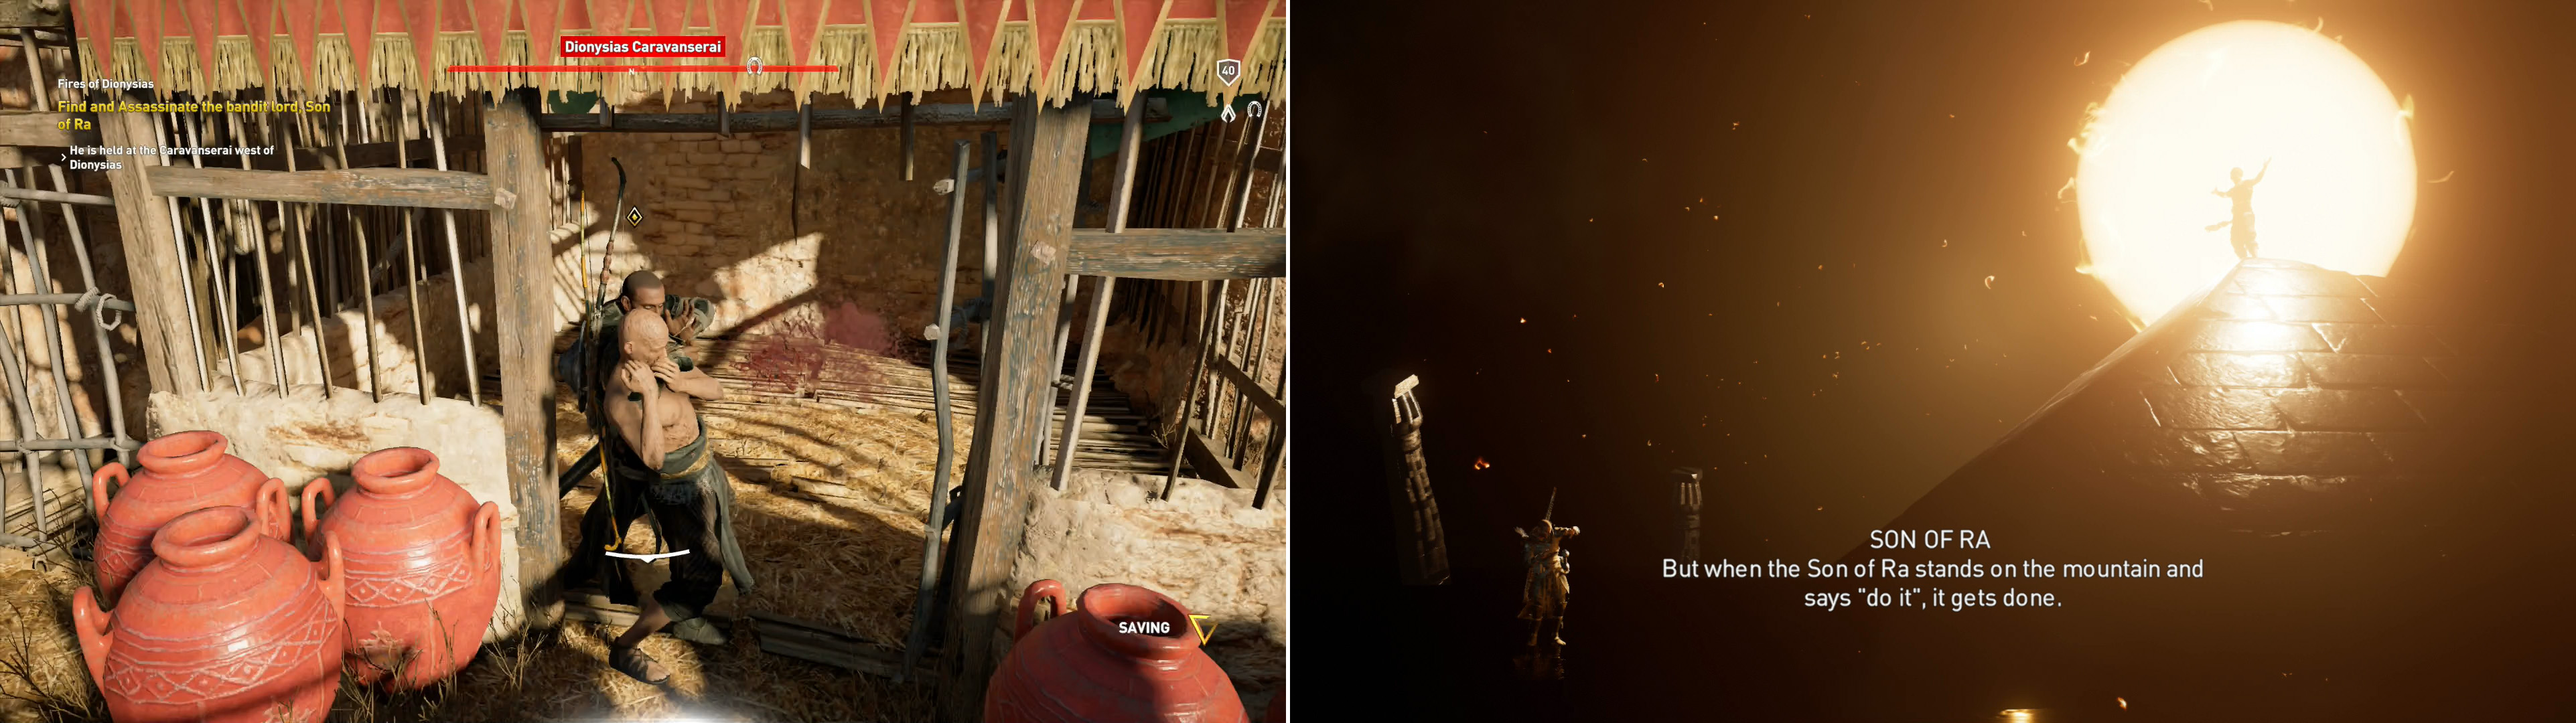 Kill the Son of Ra (left) then witness a scene where Bayek’s actions are compared to those of the man he just killed (right).